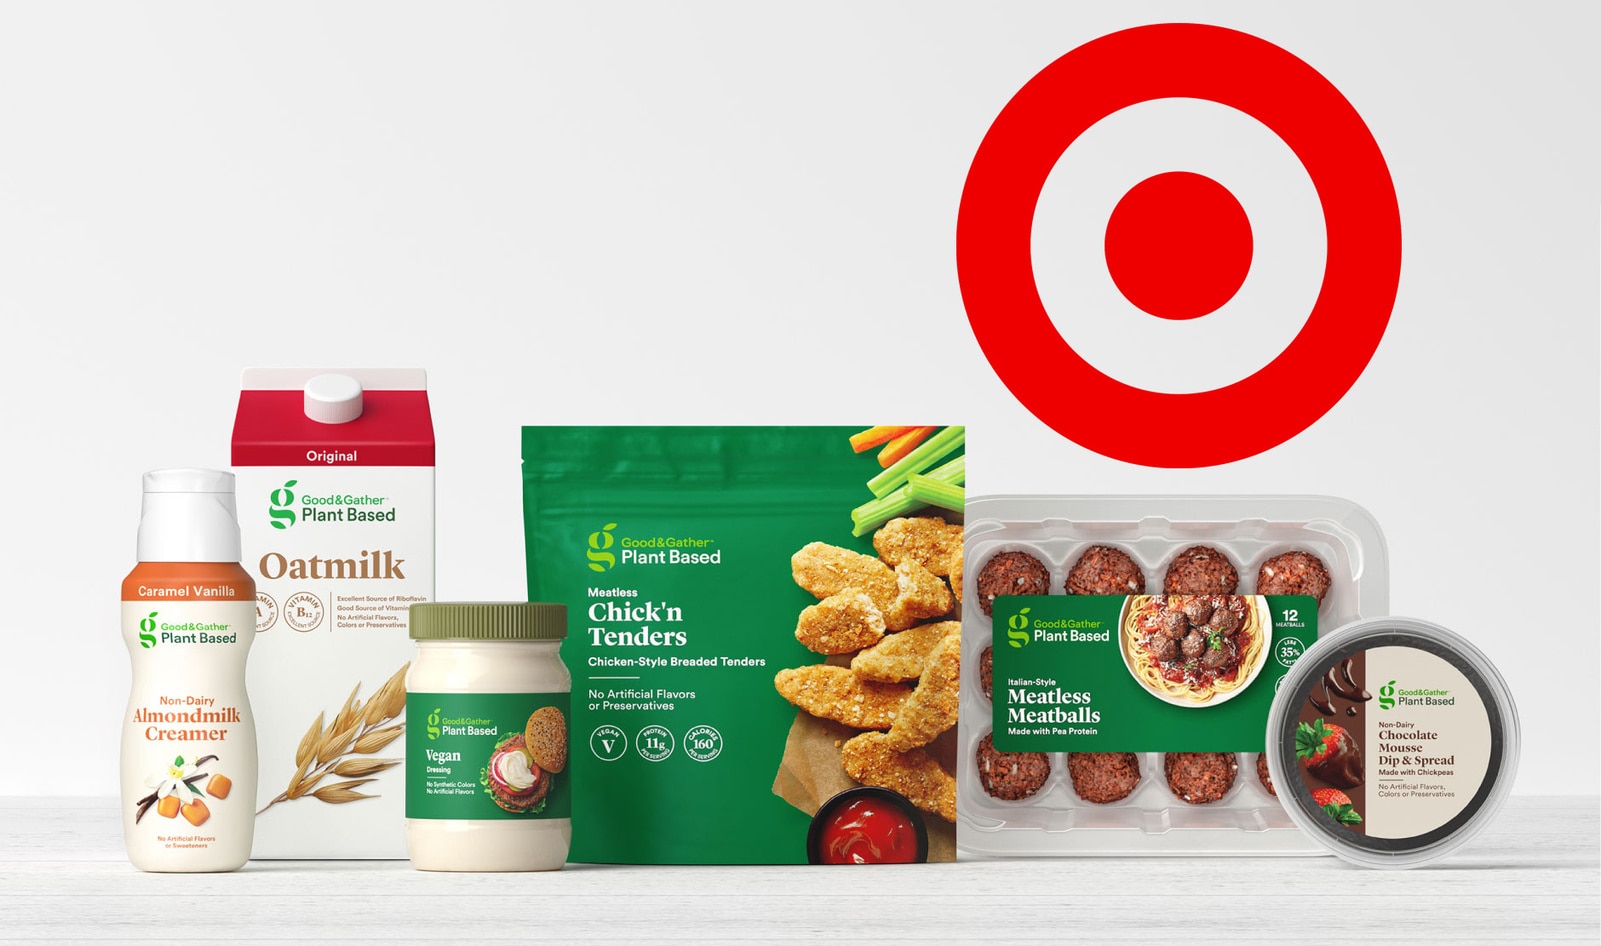 Target Launched Its Own Vegan Food Line and Nearly Everything Is Under $5&nbsp;